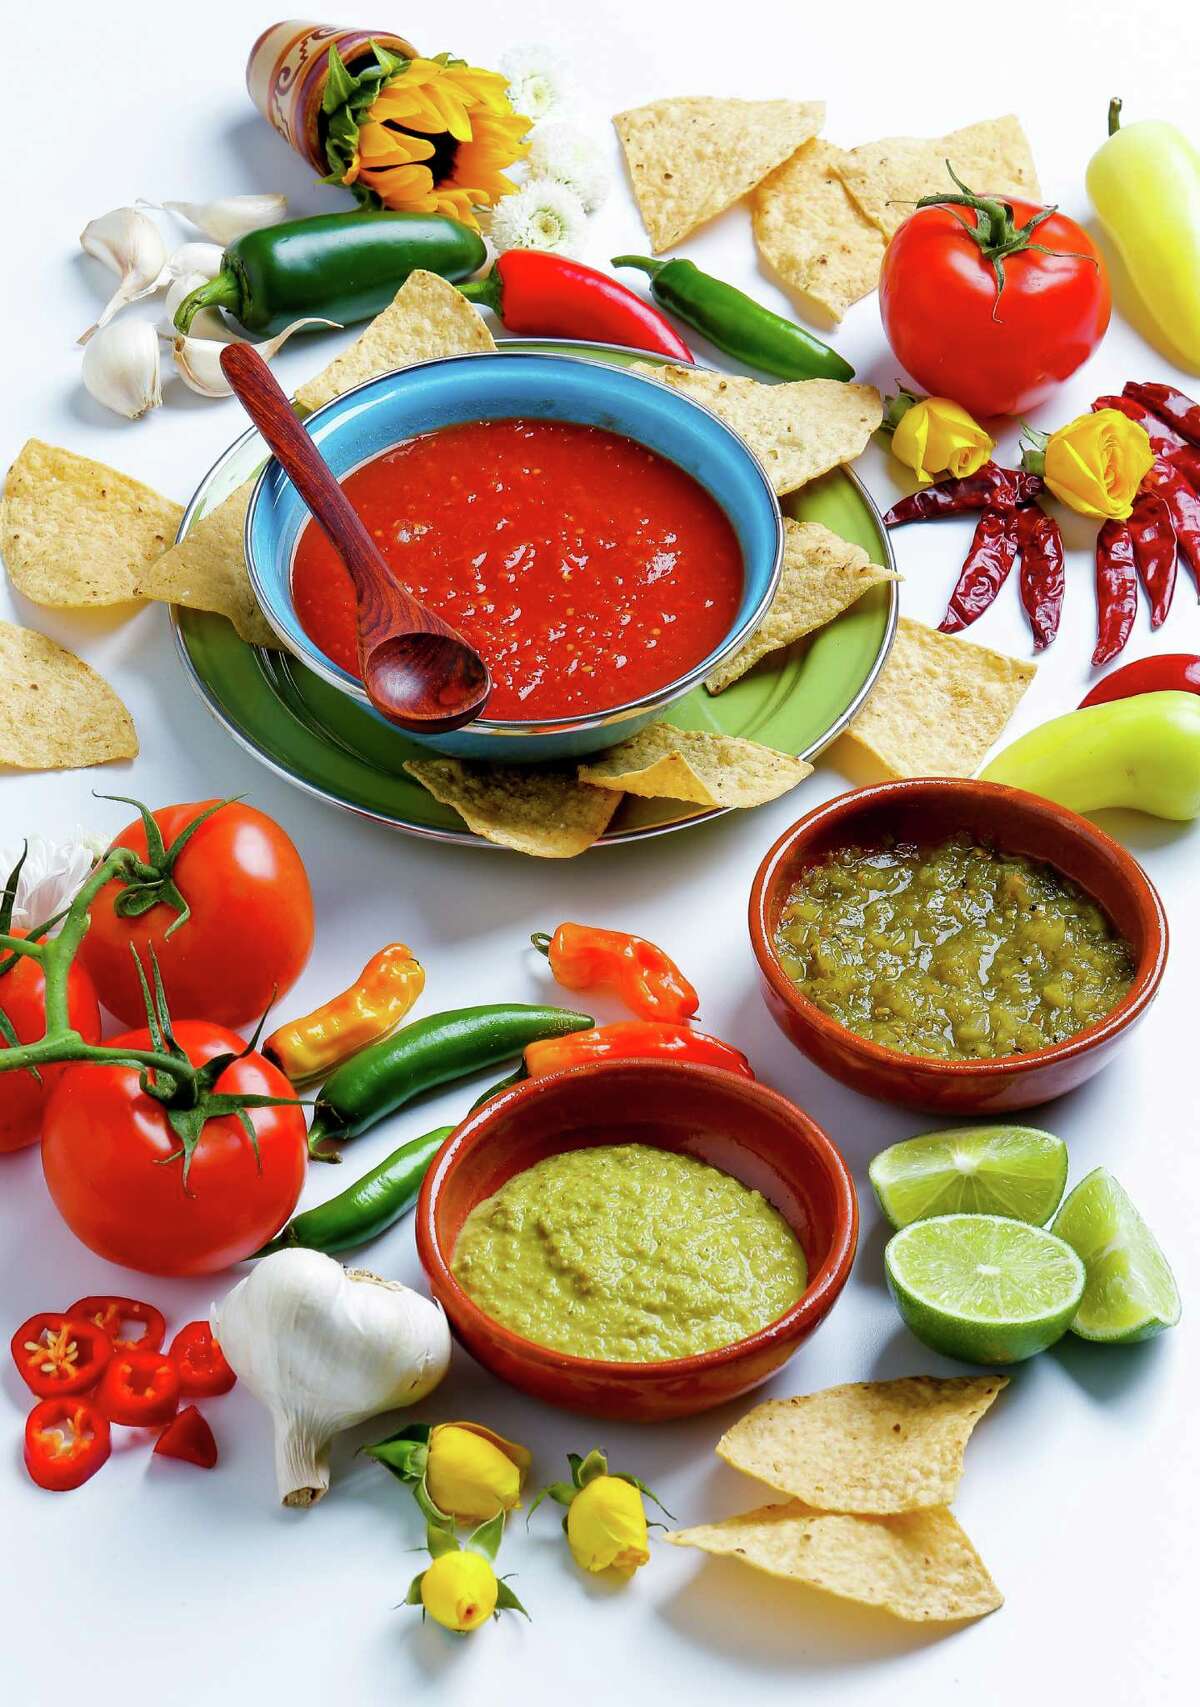 Hot or mild, salsa generally incorporates garlic, tomato and peppers. Houston restaurants can rise and fall by the quality of their versions. The following are ones the Chronicle food team has tasted over the past several months. 